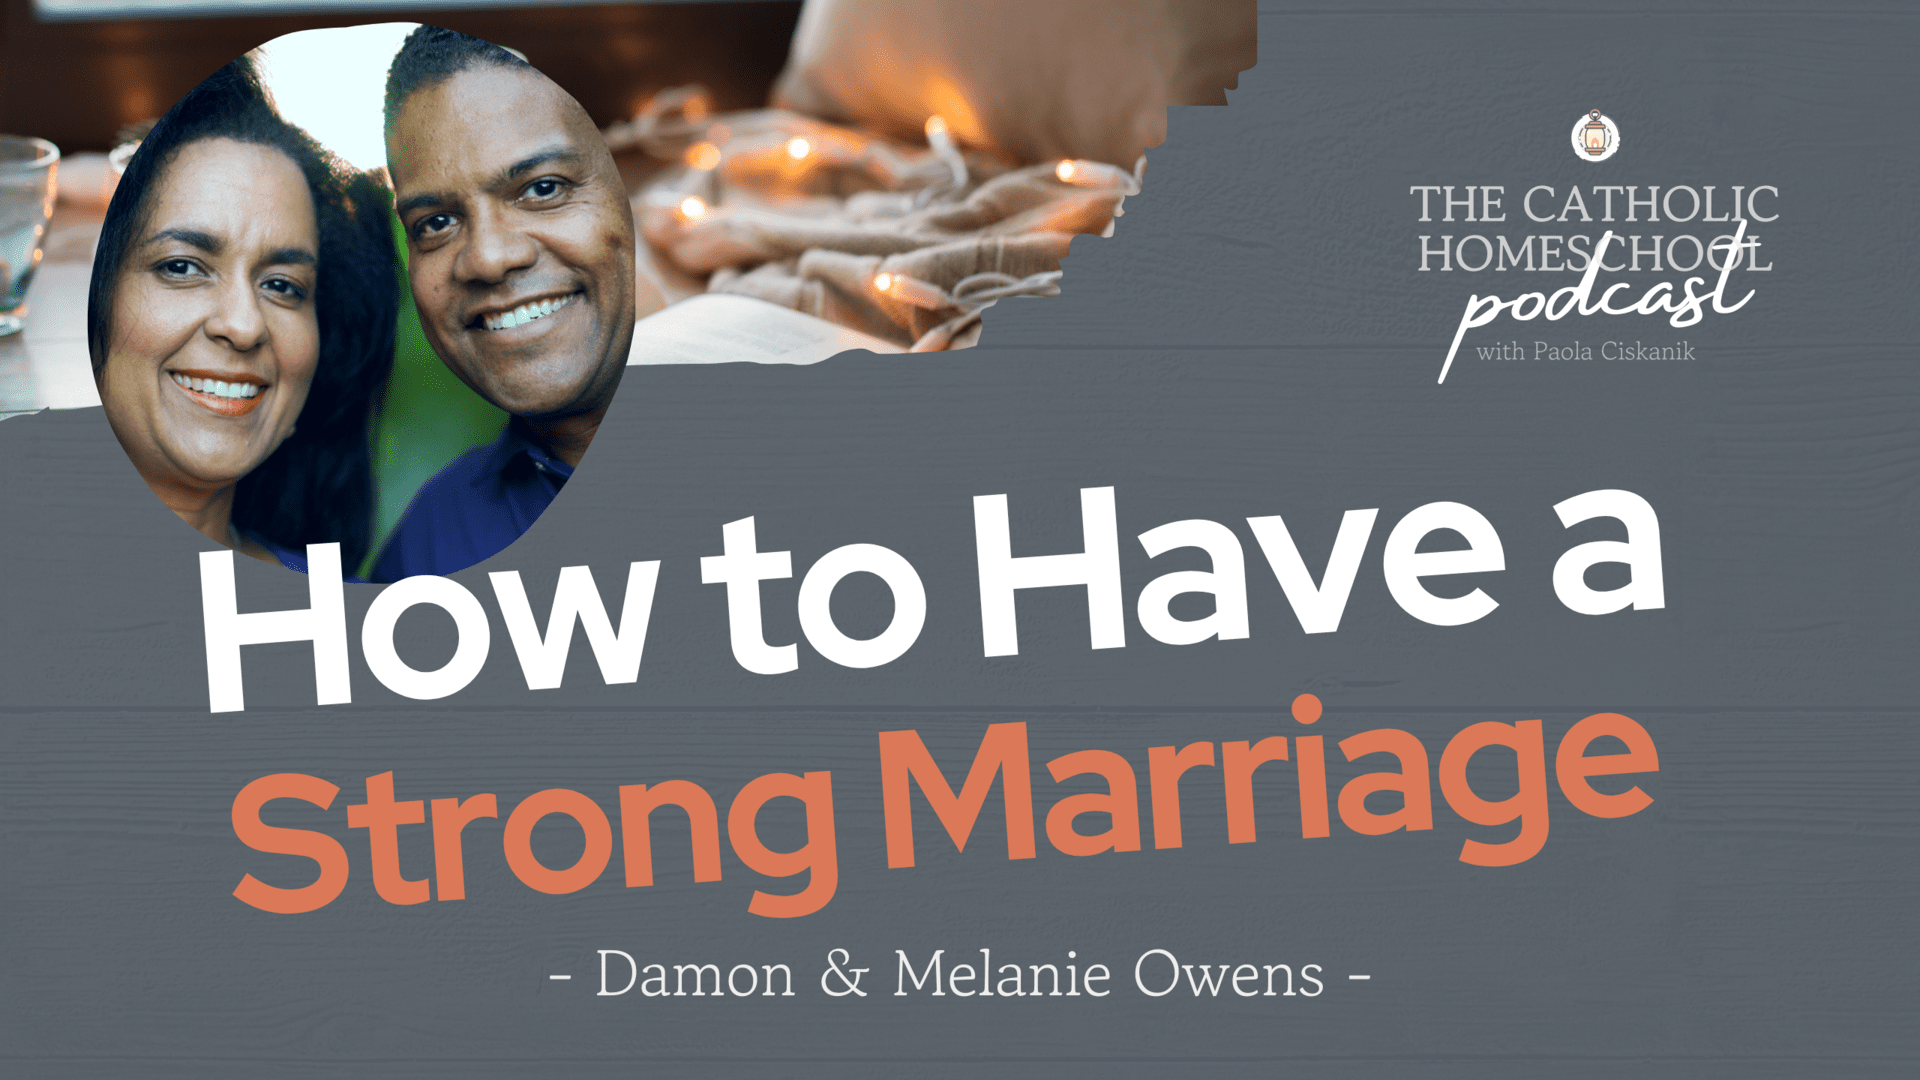 Damon & Melanie Owens | How to Have a Strong Catholic Marriage | The Catholic Homeschool Podcast